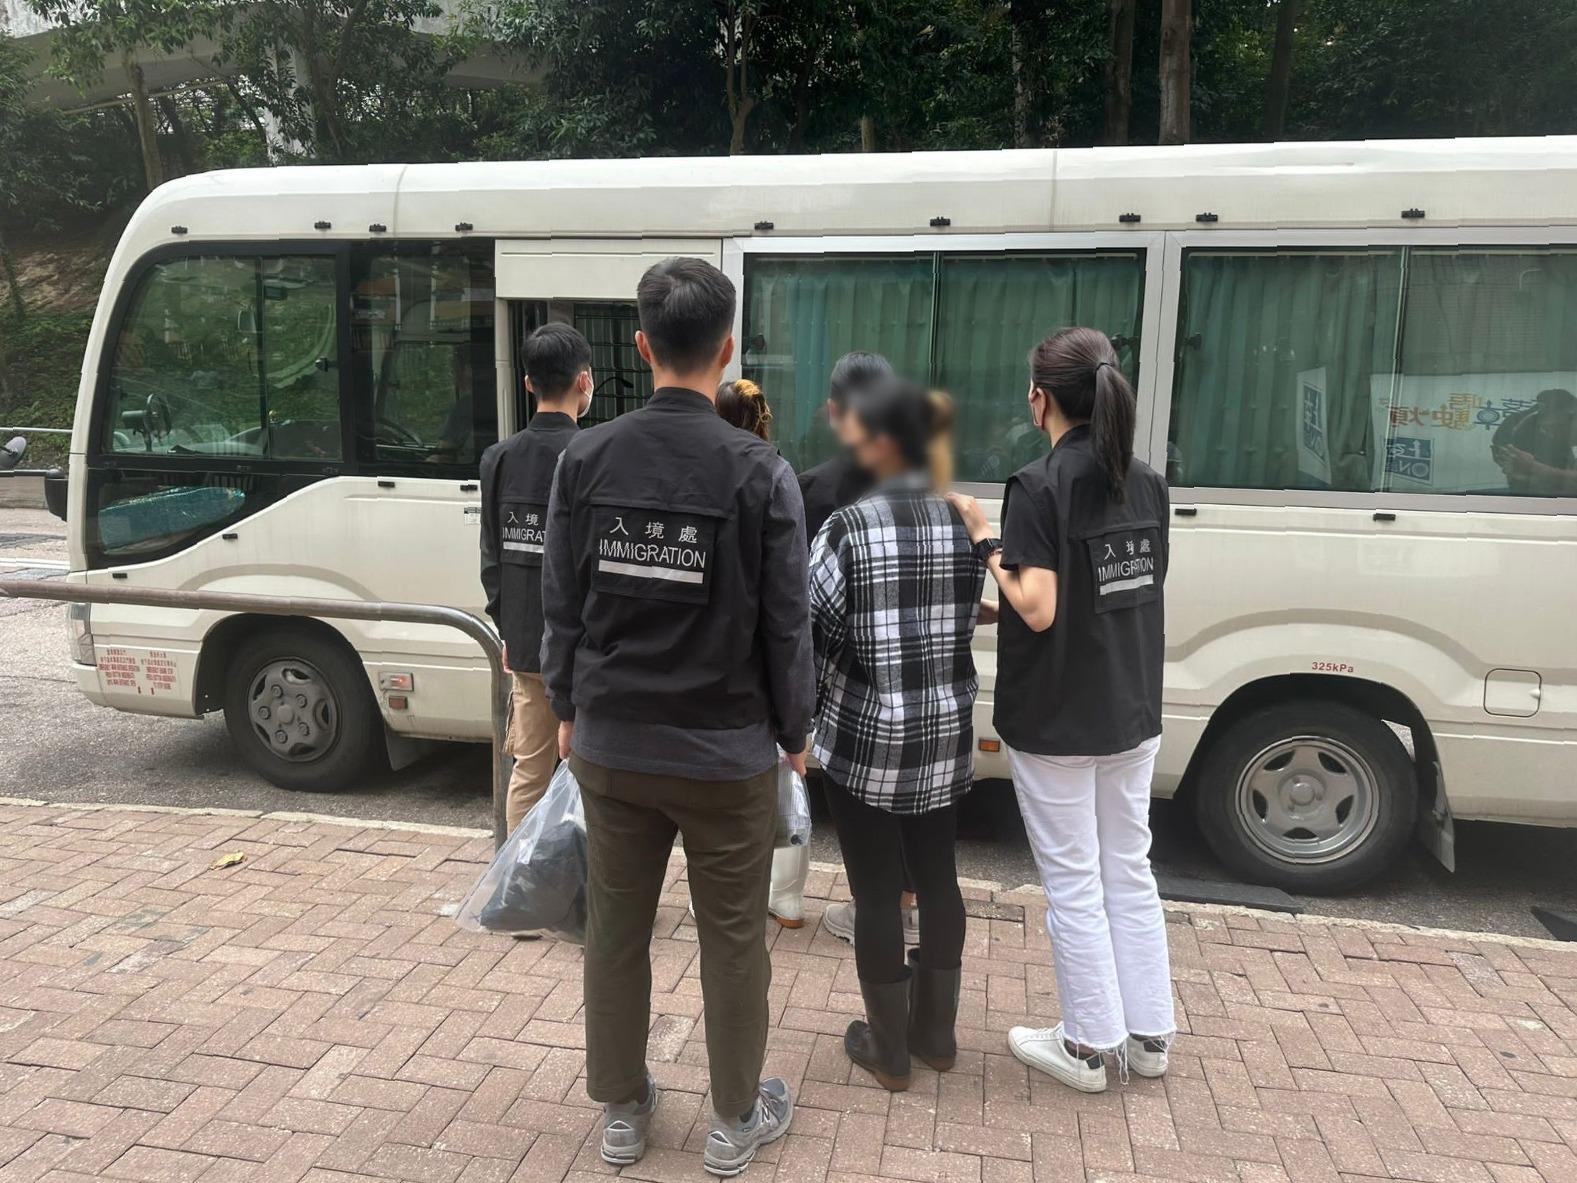 The Immigration Department mounted a series of territory-wide anti-illegal worker operations codenamed "Lightshadow", "Twilight", joint operations with the Hong Kong Police Force and Labour Department codenamed "Powerplayer" and joint operations with the Hong Kong Police Force codenamed "Champion" and "Windsand" for four consecutive days from April 24 to yesterday (April 27). Photo shows suspected illegal workers arrested during an operation.